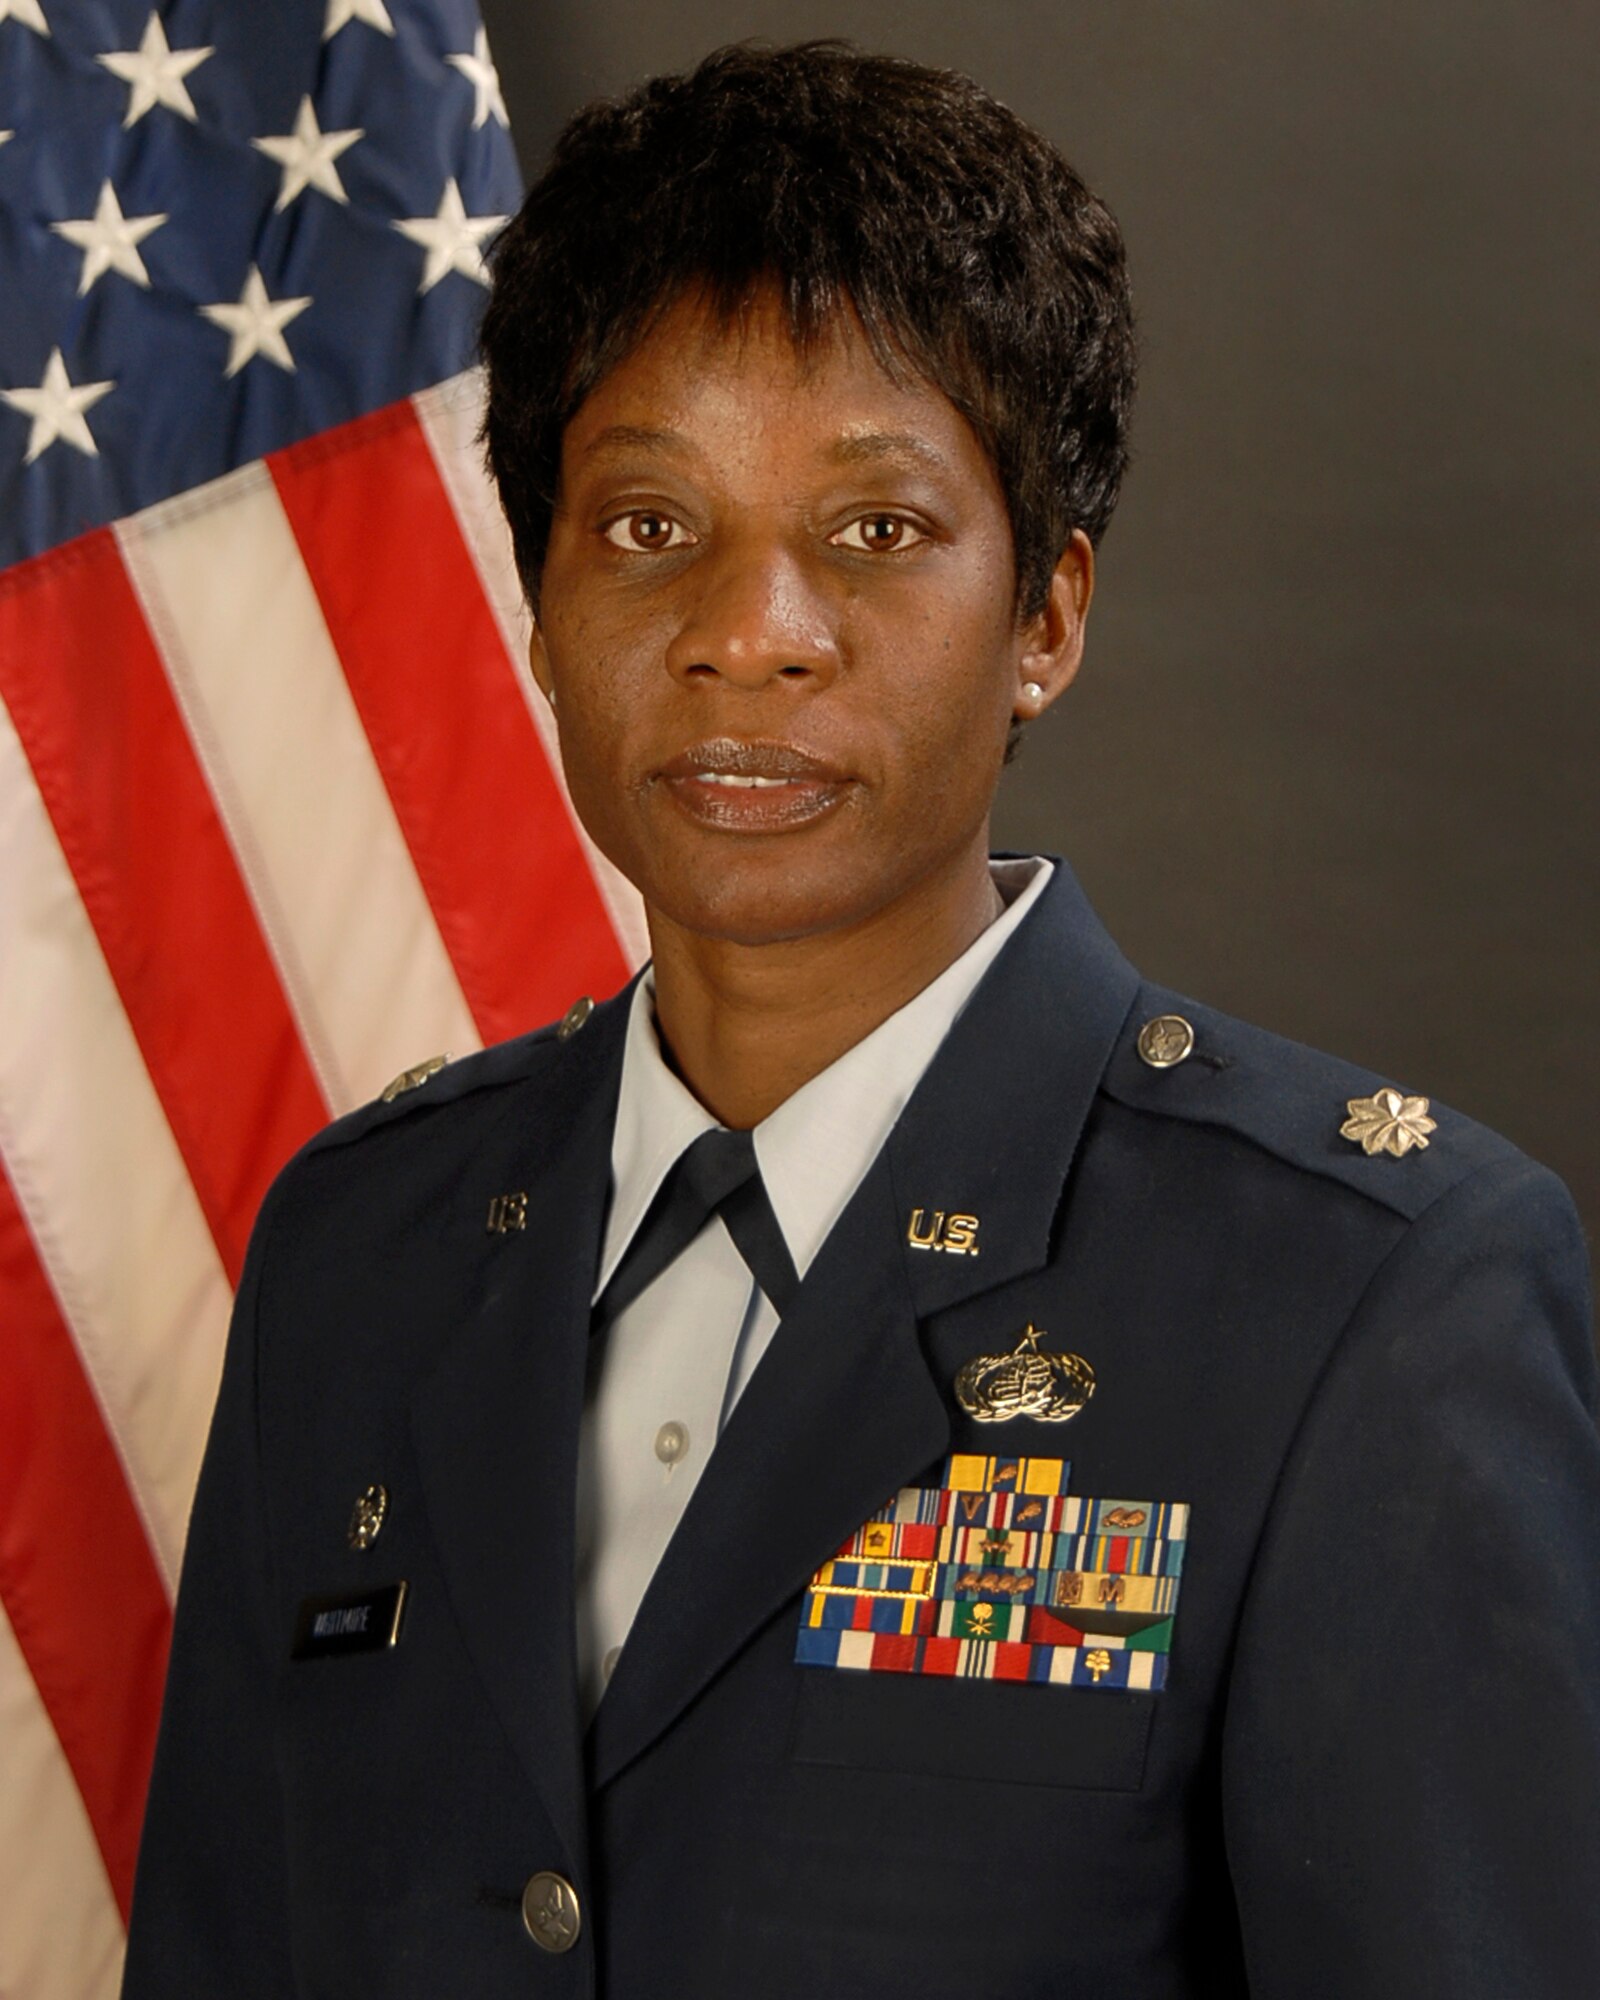 Portrait of Lt. Col. Rita Witmire, the Deputy Commander of the 169th Mission Support Group.
(National Guard photo by Tech. Sgt. Caycee Watson/Released)